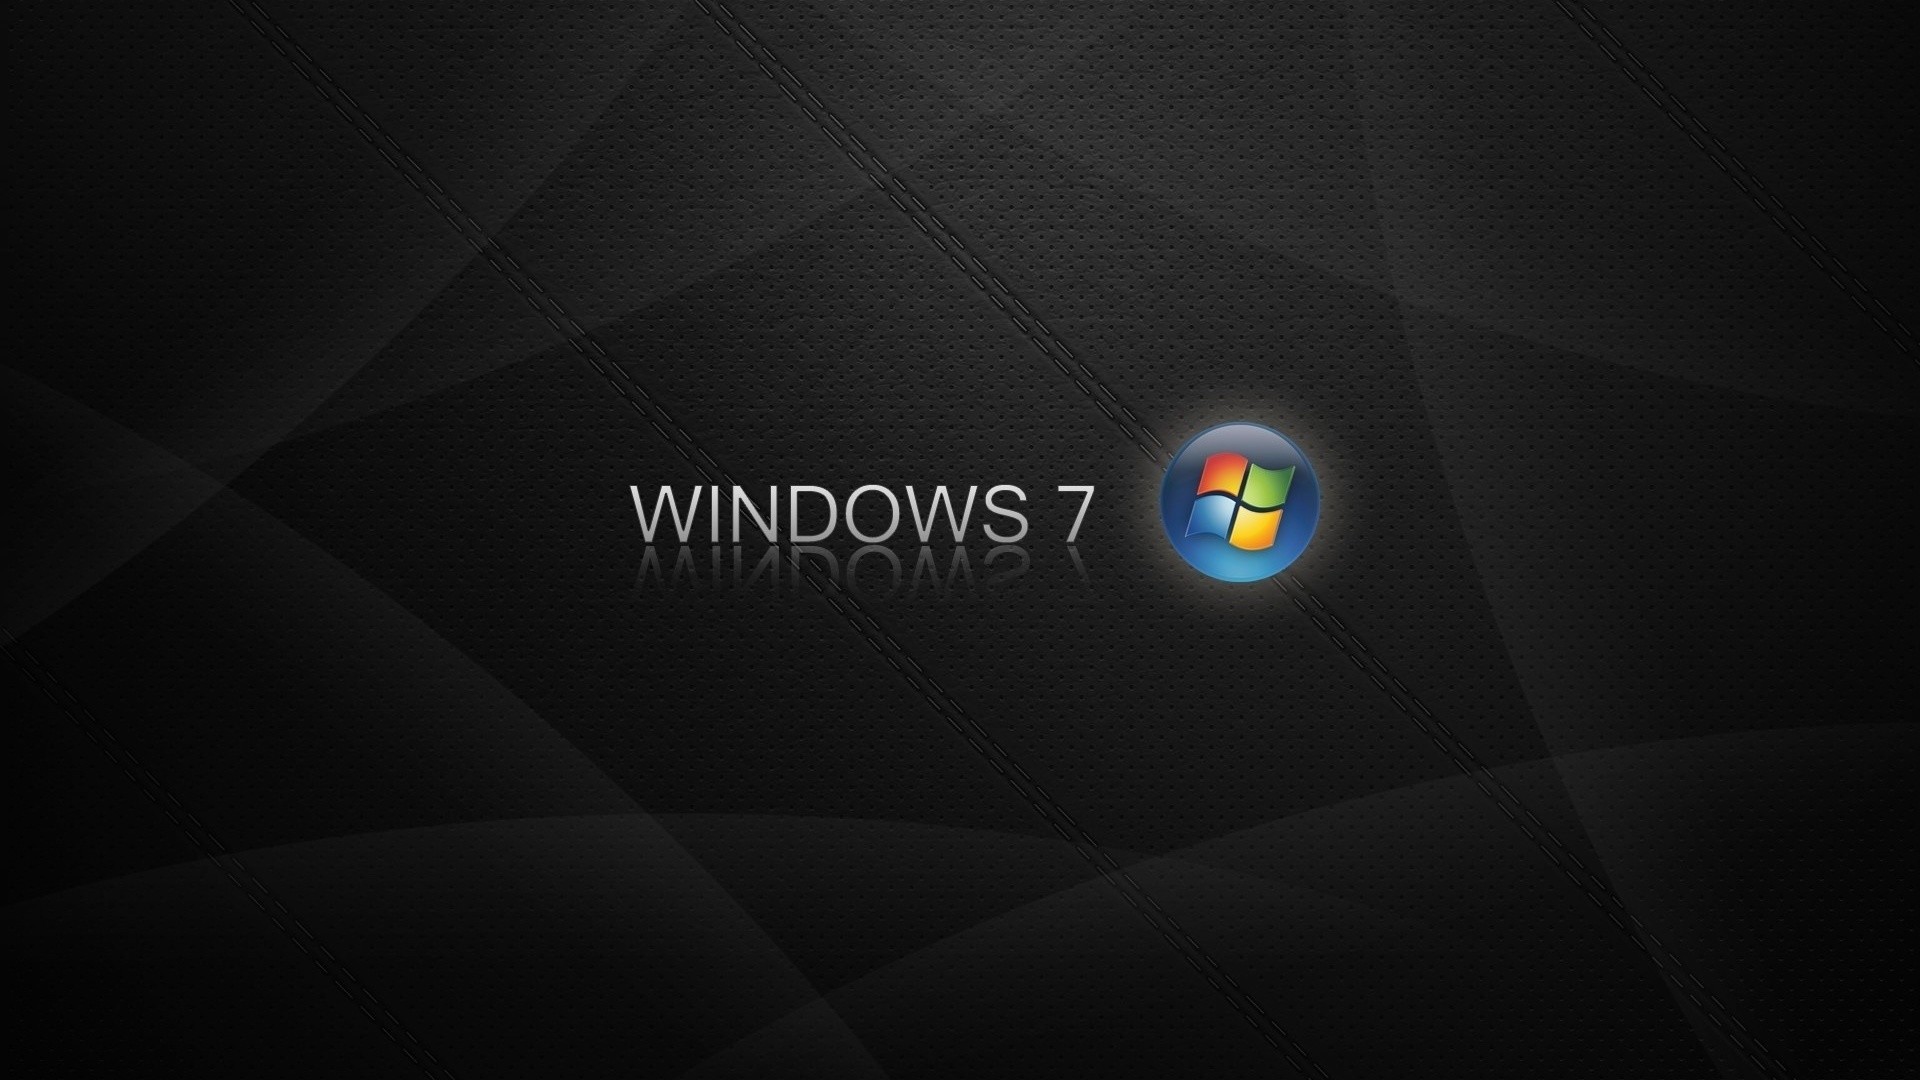 1920x1080 ... Wallpapers 19 Pictures of Windows 7 in FHDQ